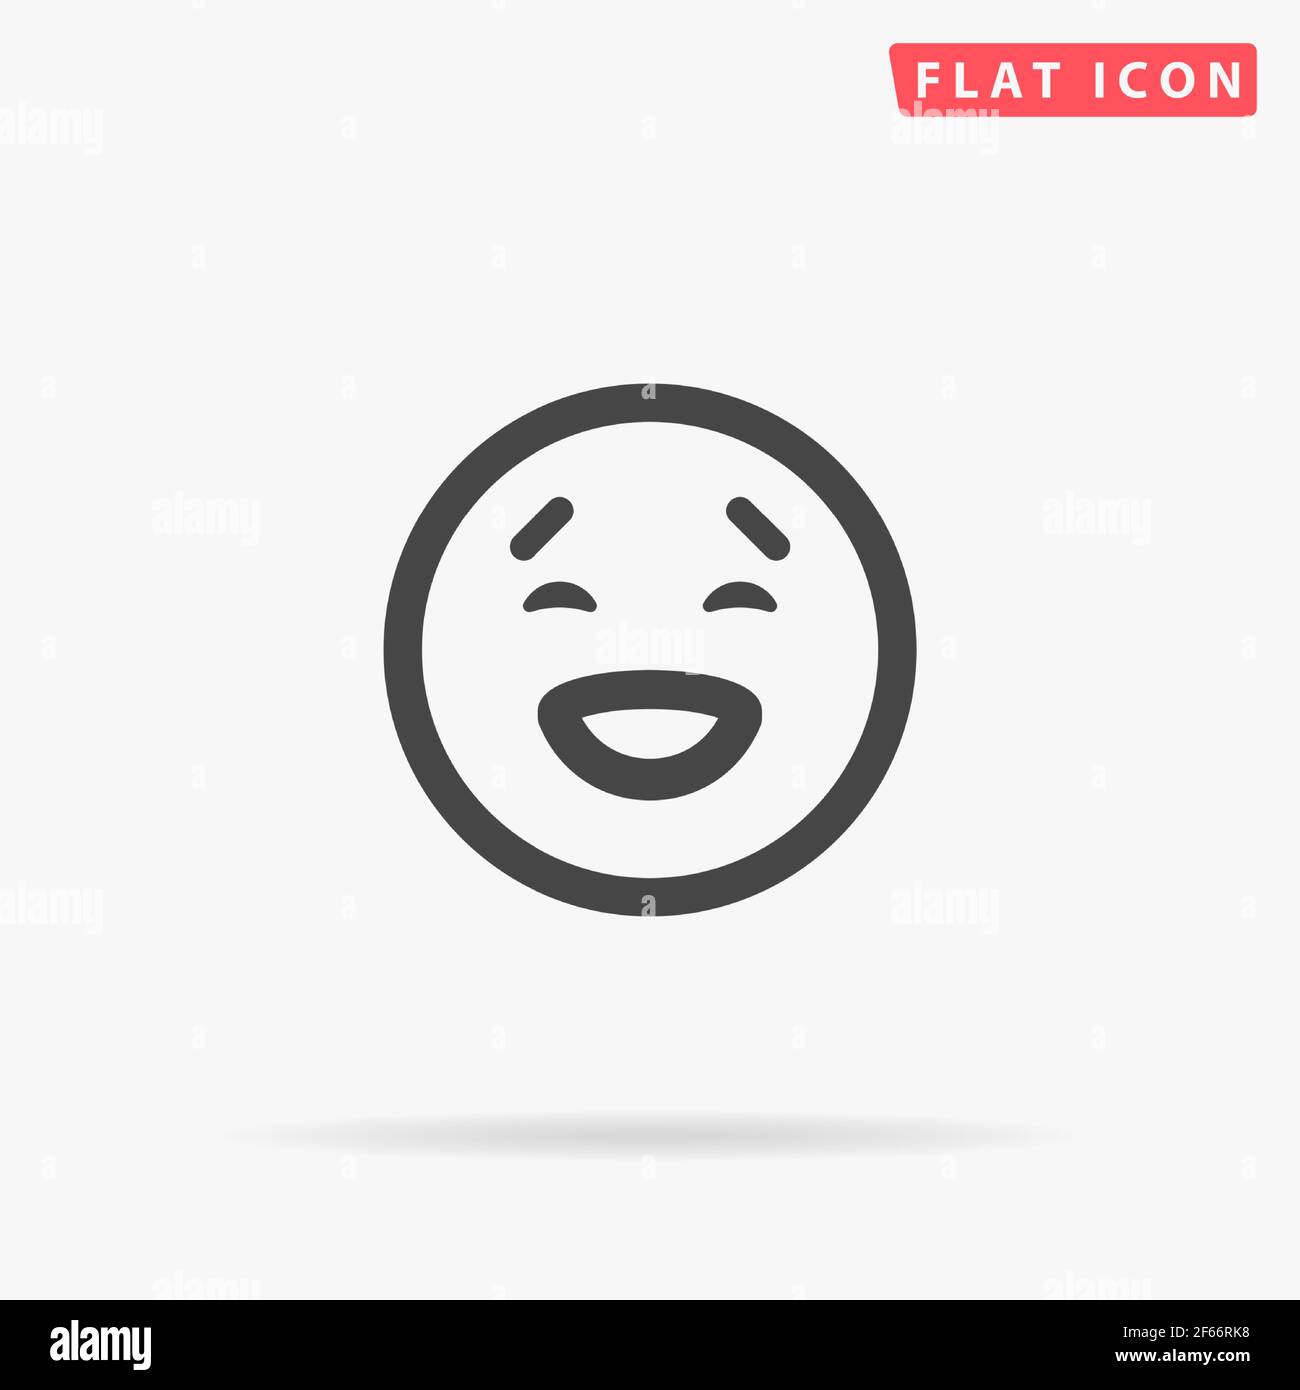 Laughing Face flat vector icon. Hand drawn style design illustrations. Stock Vector